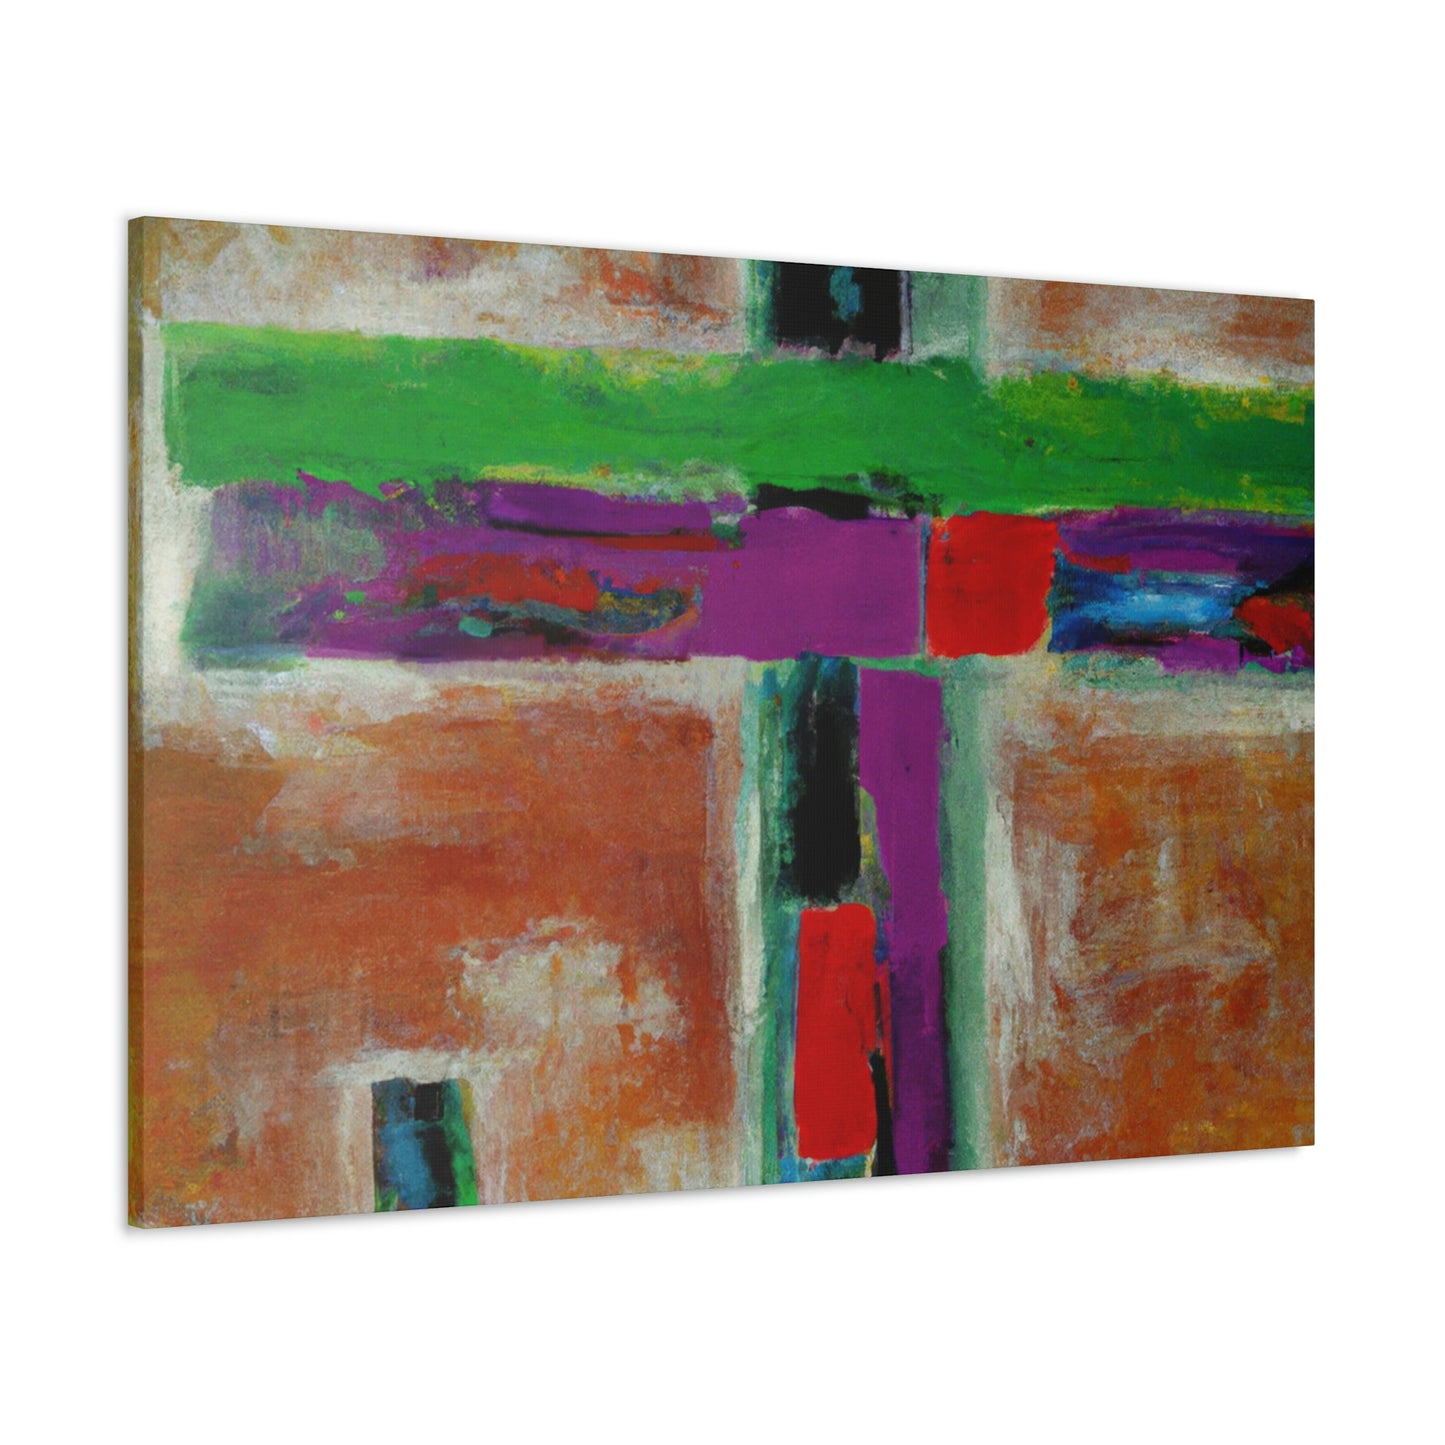 already given

1 Peter 3:12 - Canvas Wall Art